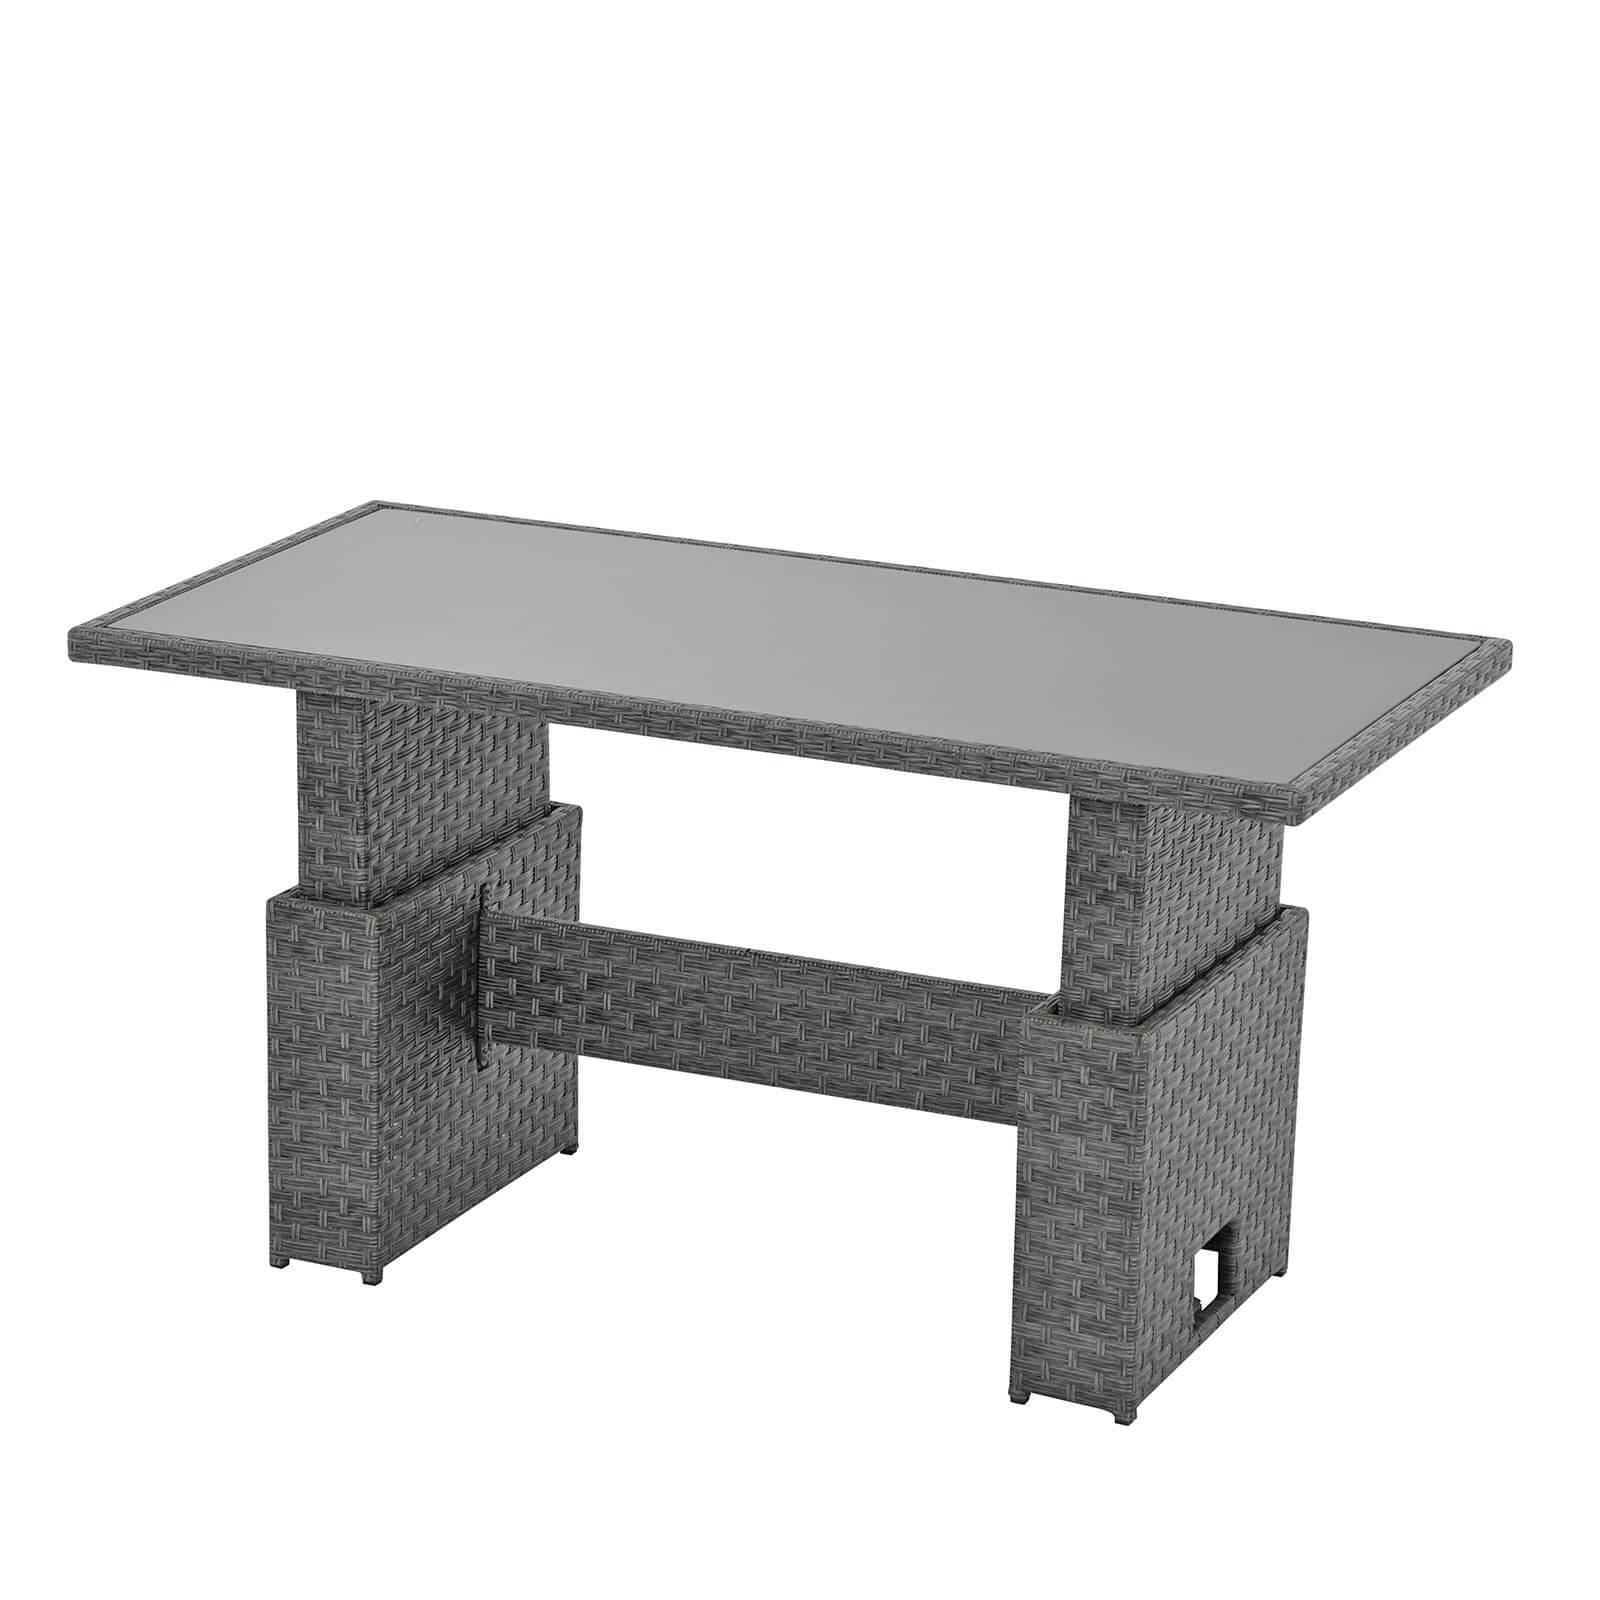 Outdoor Patio Lift Dining Table, Rectangle Patio Coffee Table with Glass Tabletop